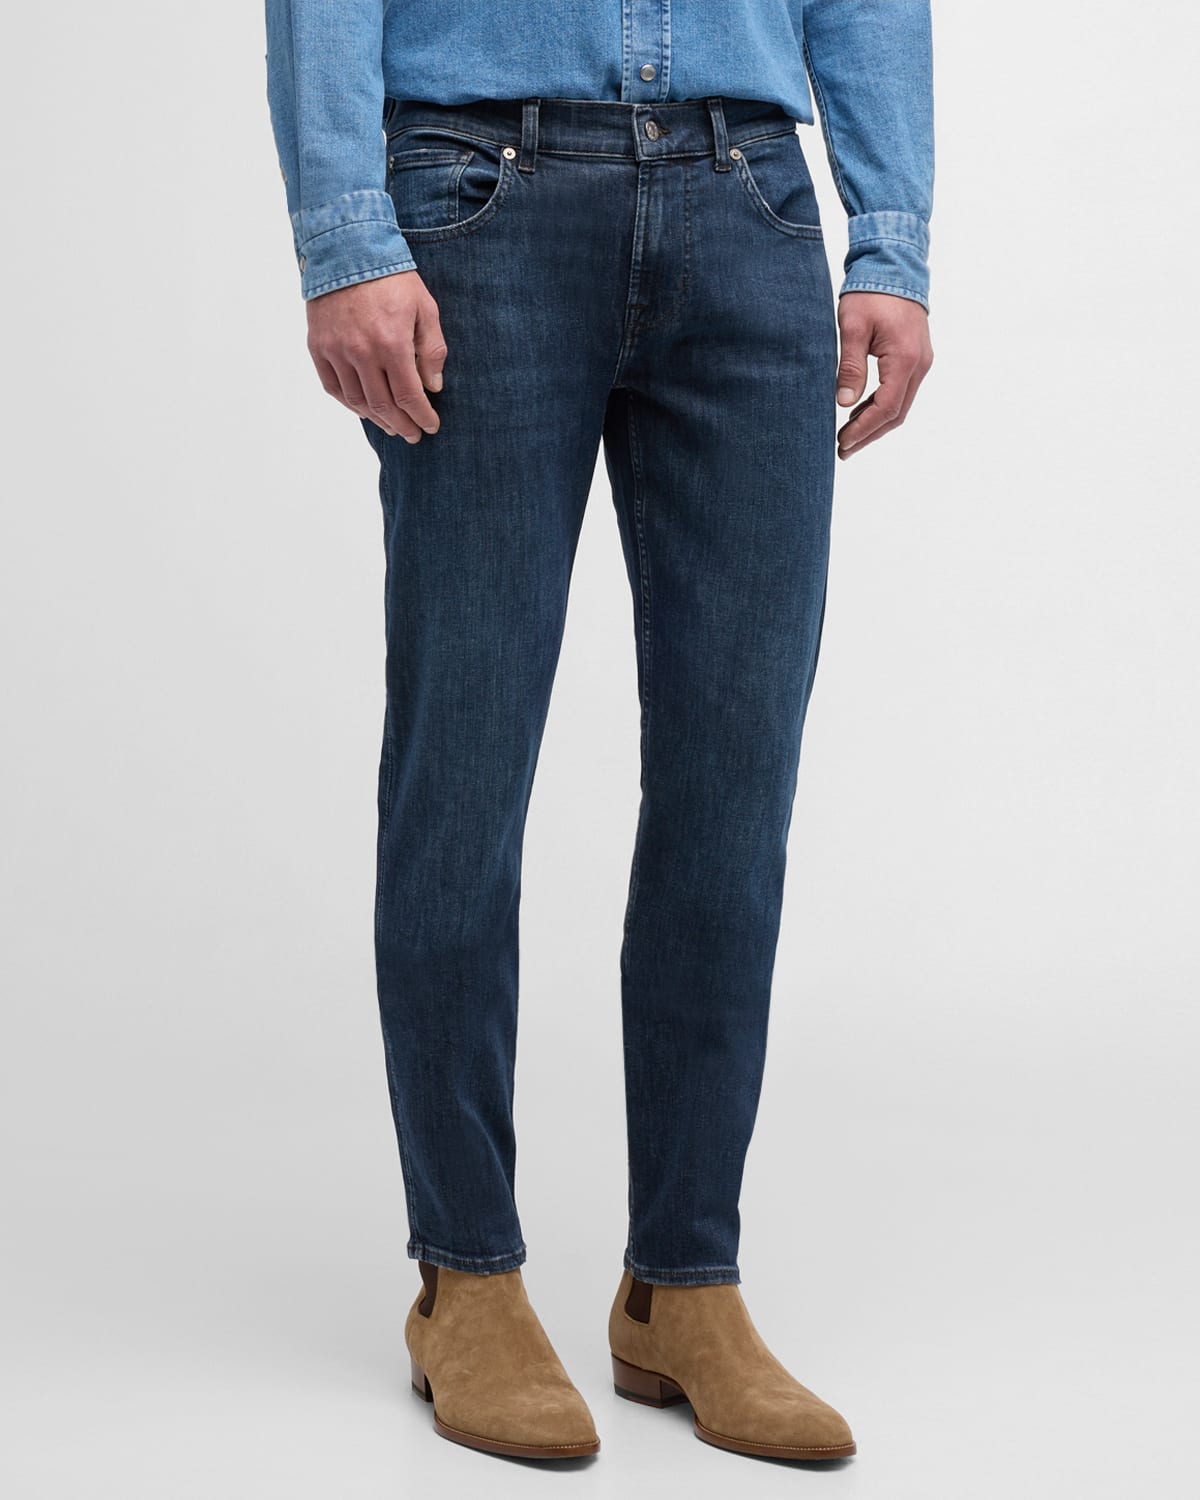 7 FOR ALL MANKIND MEN'S SLIMMY TAPERED JEANS